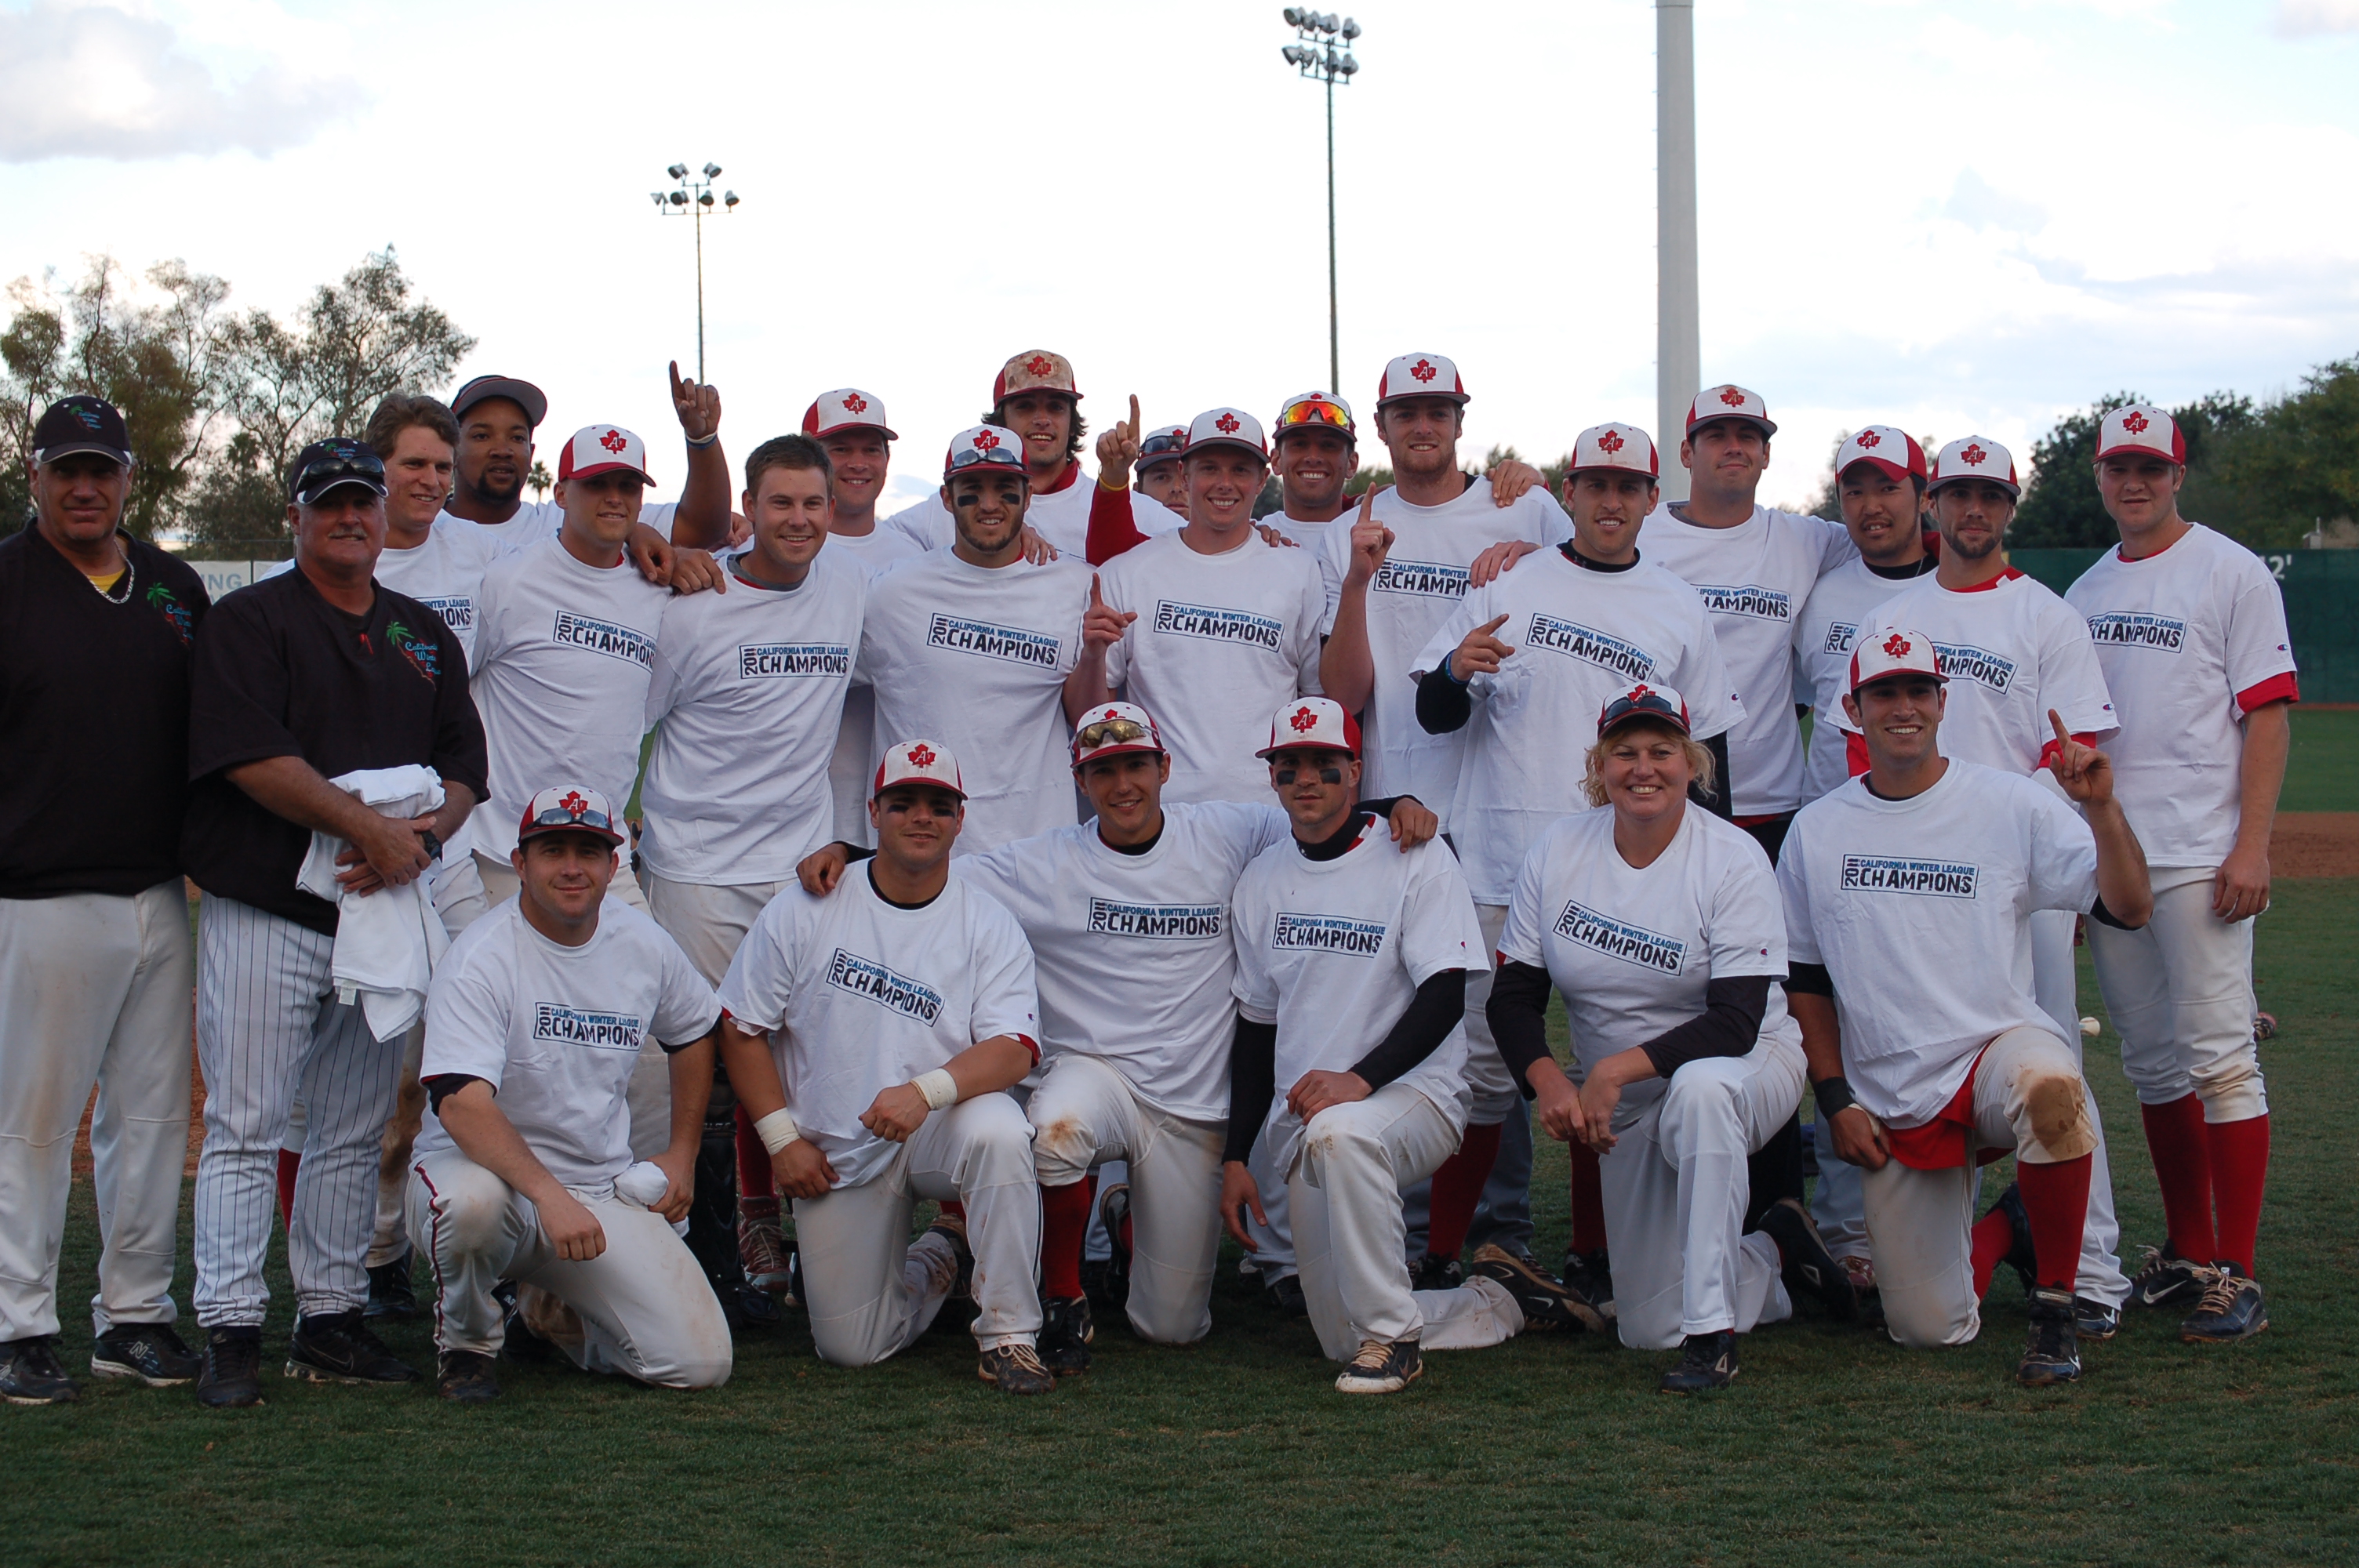 A’s Top Coyotes 9-2 to Claim 2011 Championship